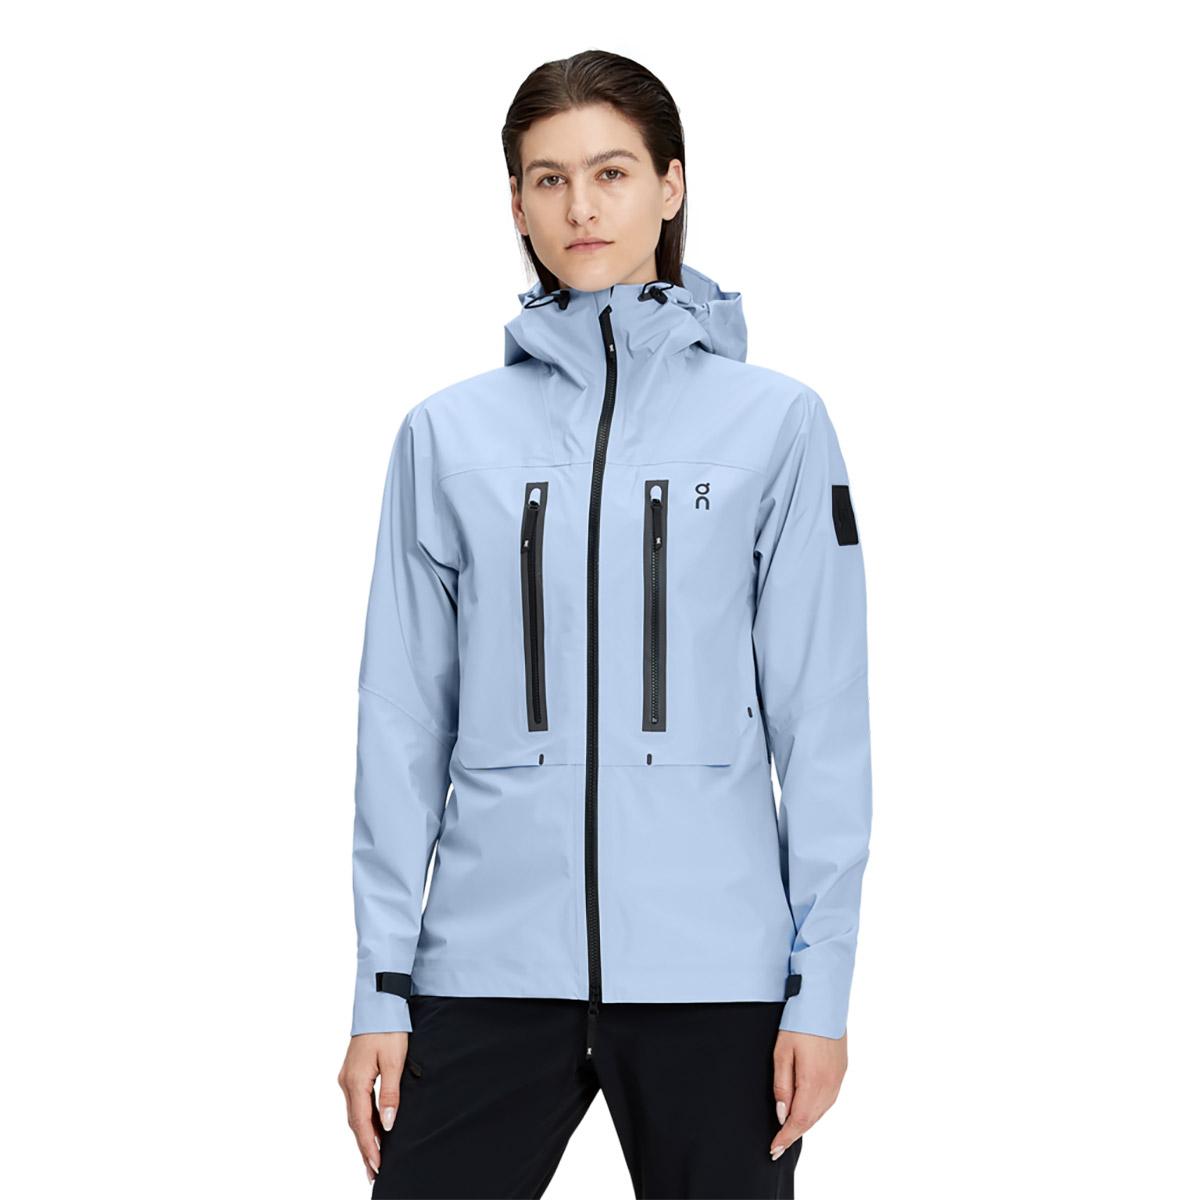 On Womens Storm Jacket - Stratosphere